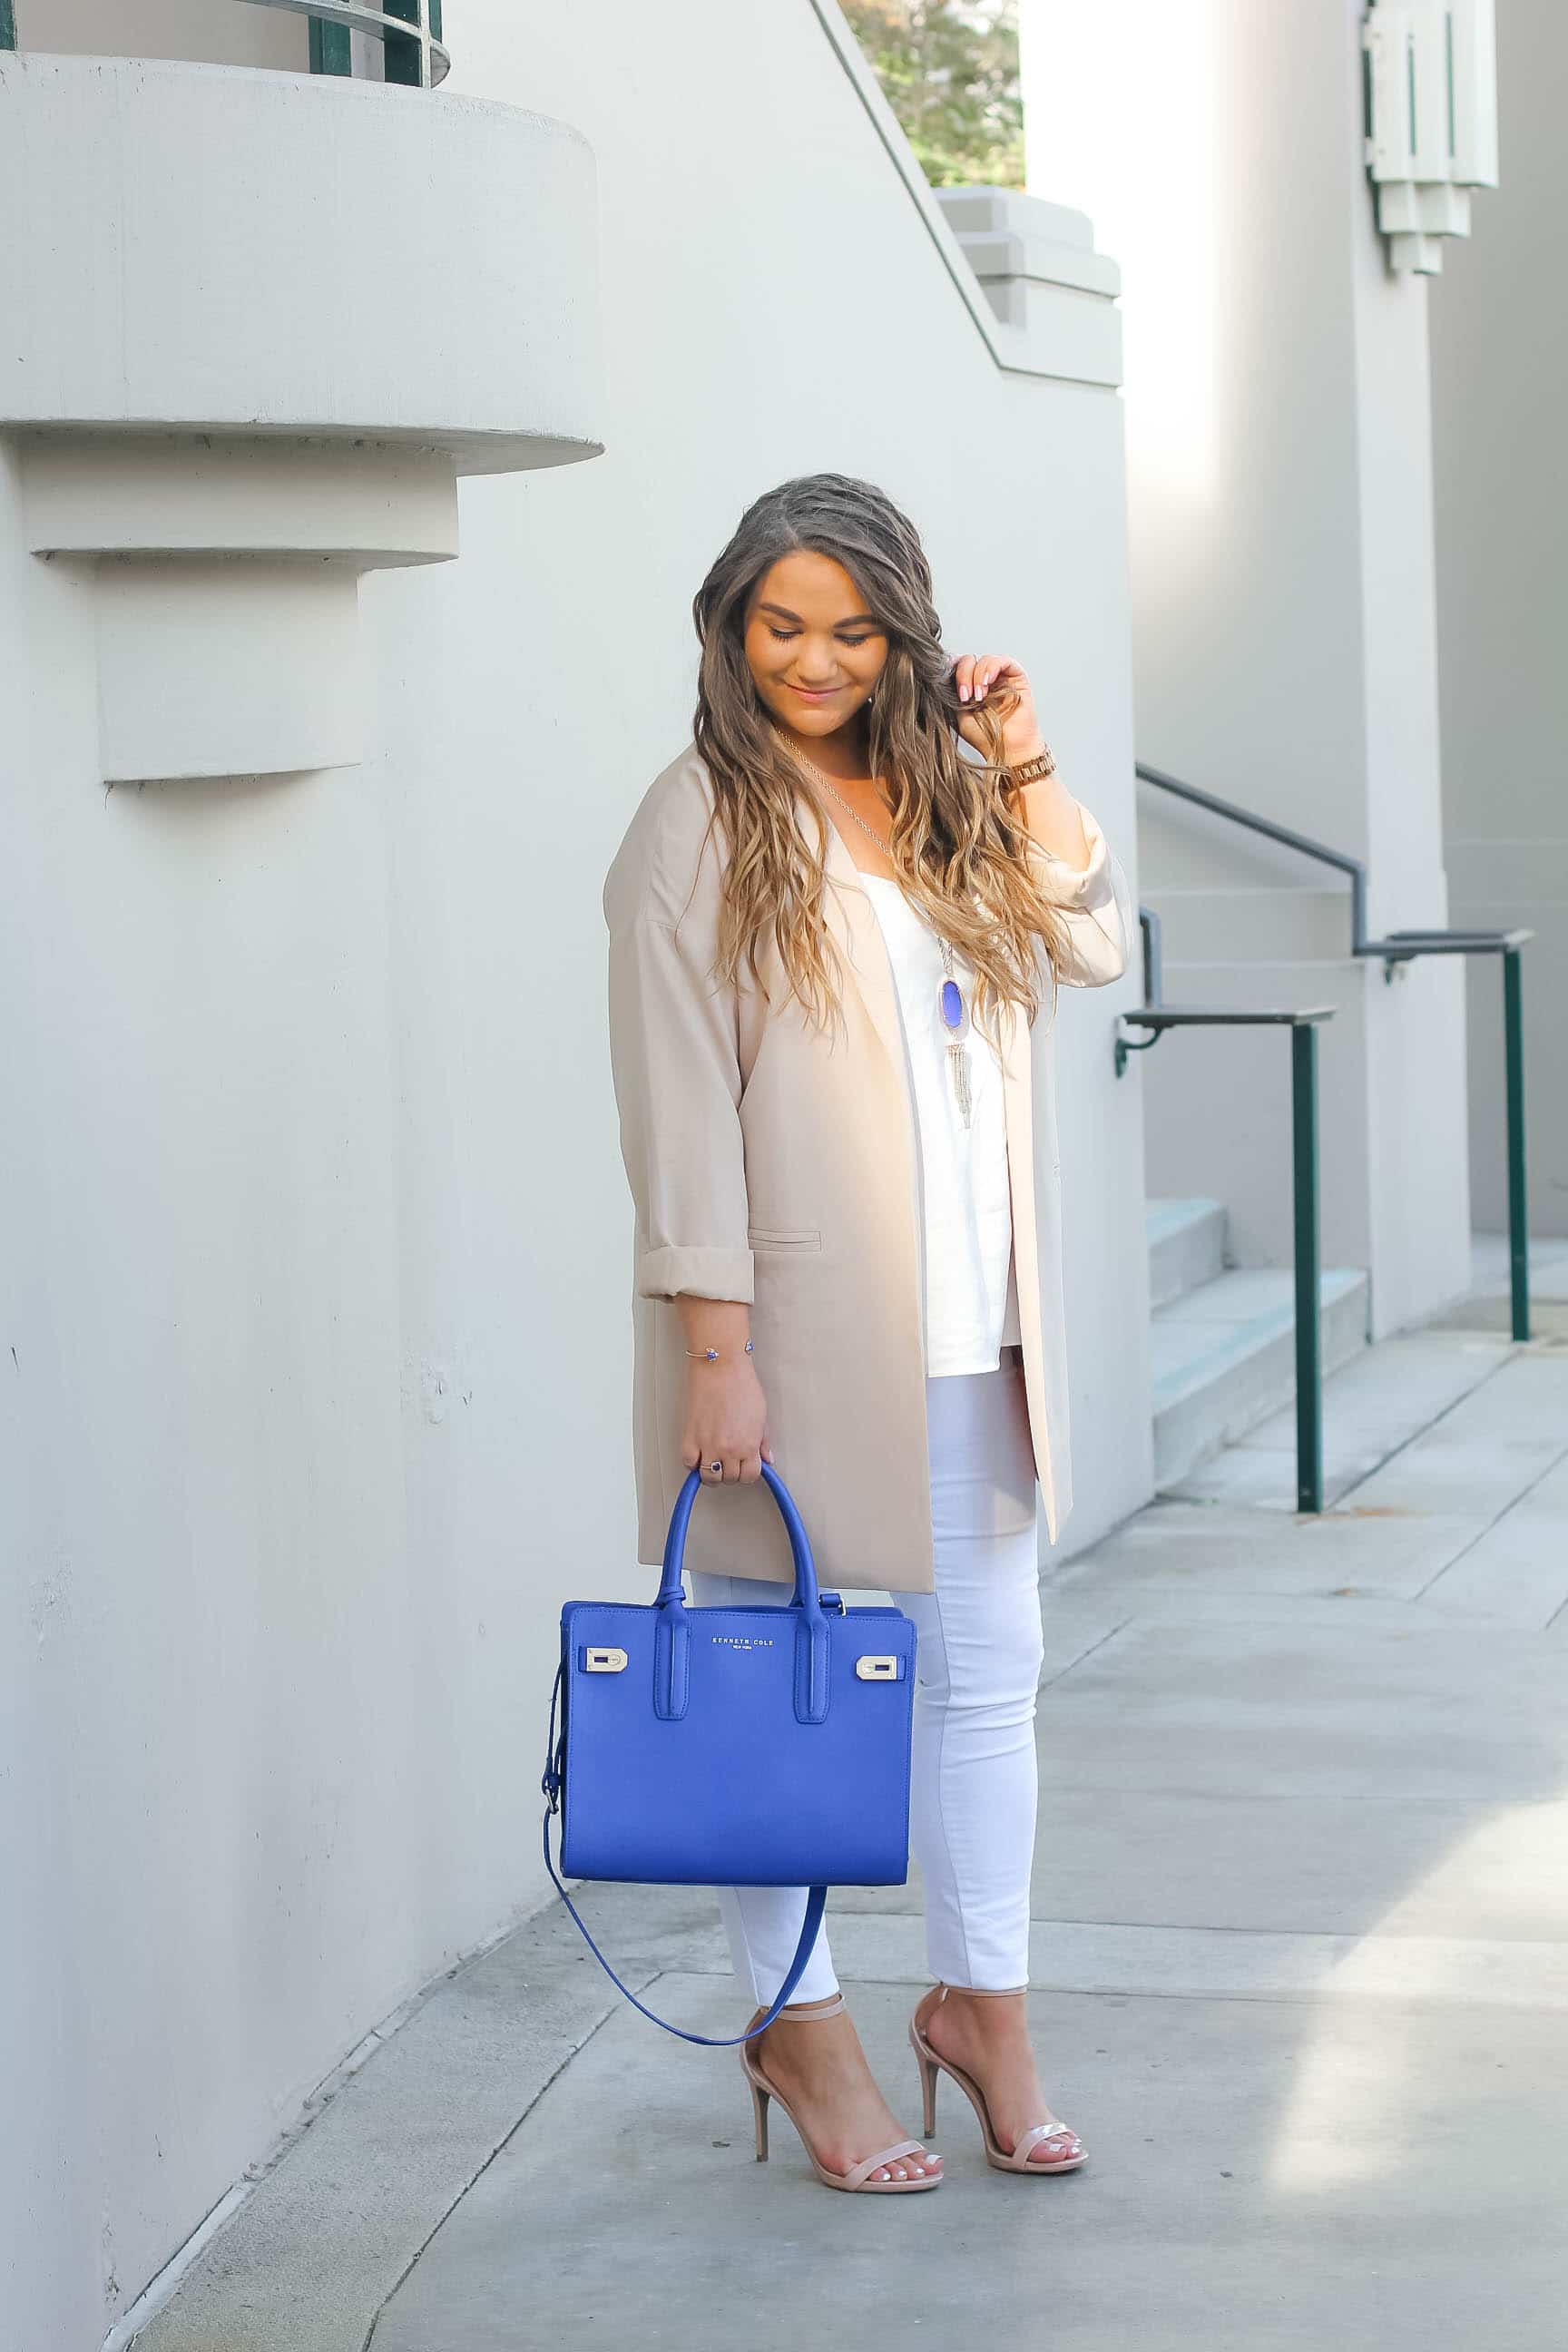 missyonmadison, fashion blogger, missyonmadison instagram, outfit inspo, la blogger, cobalt blue satchel, style blogger, summer style, nude ankle strap heels, old navy, white skinny jeans, old navy white rockstar jeans, beverly hills city hall, nude duster blazer, duster blazer, nude blazer, white chiffon camisole, topshop camisole, raybans, pop of color,